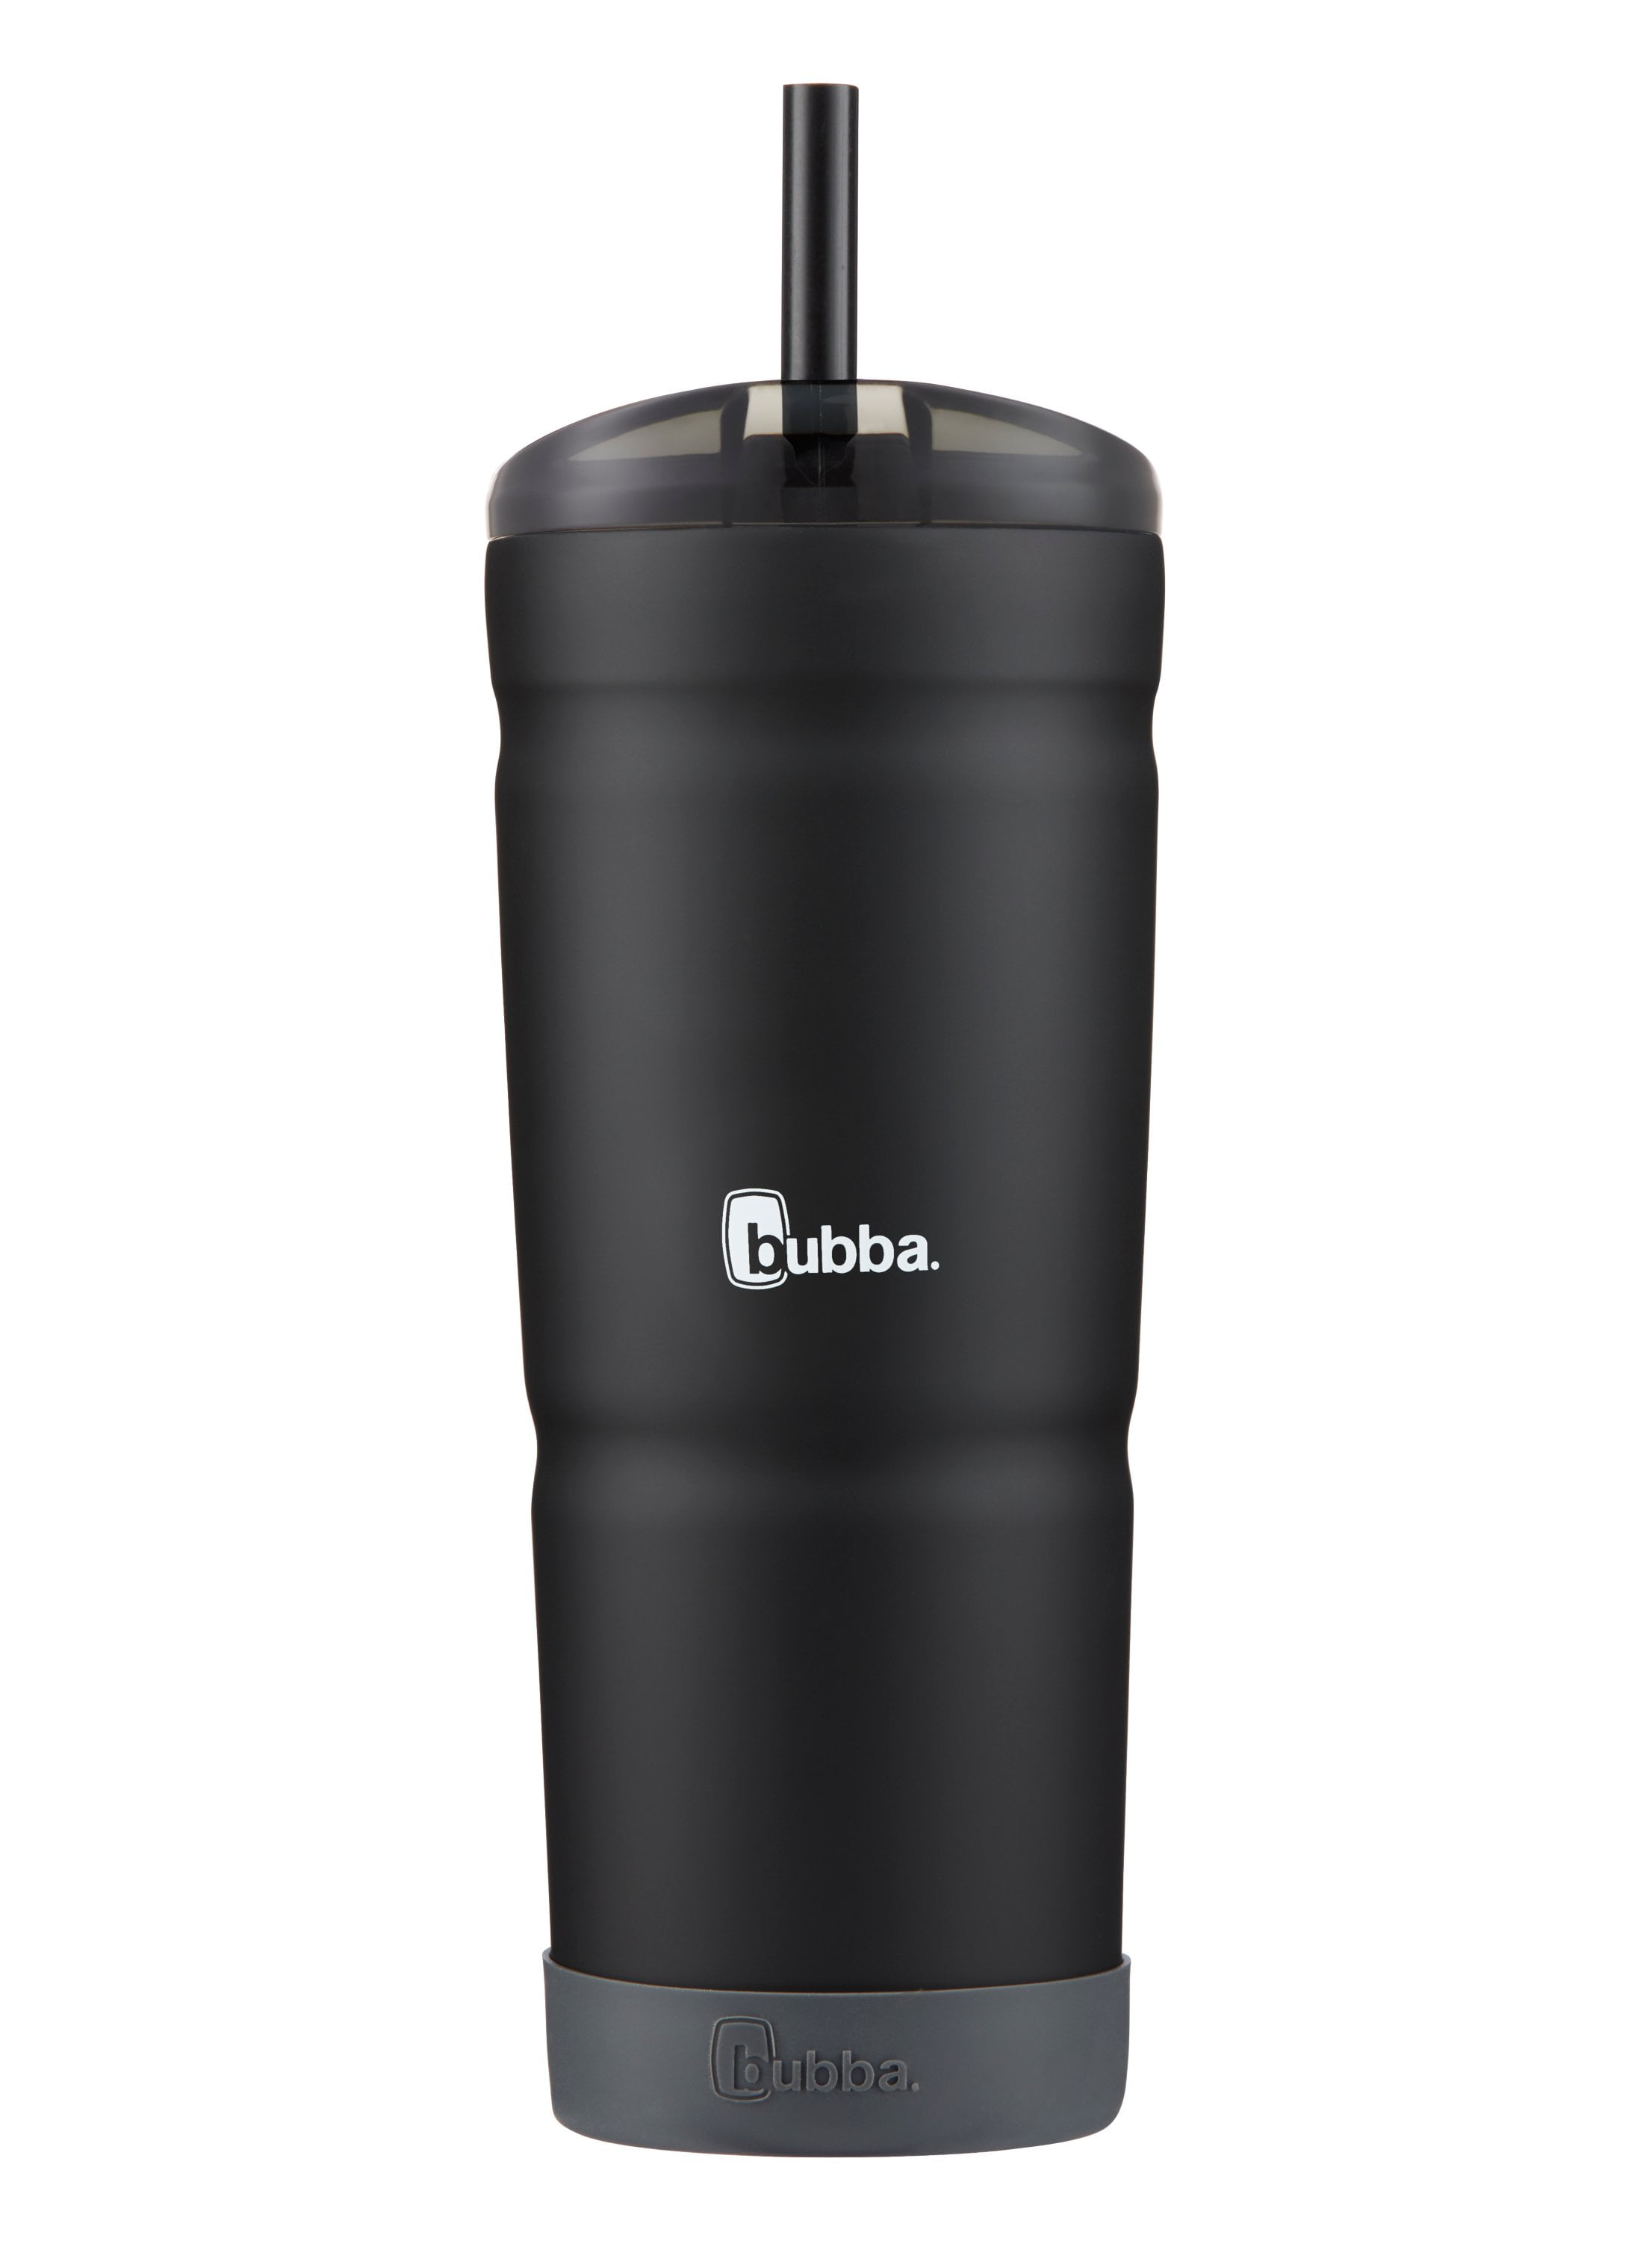 Bubba Water Bottle, Envy S with Bumper, Licorice, 24 Ounce